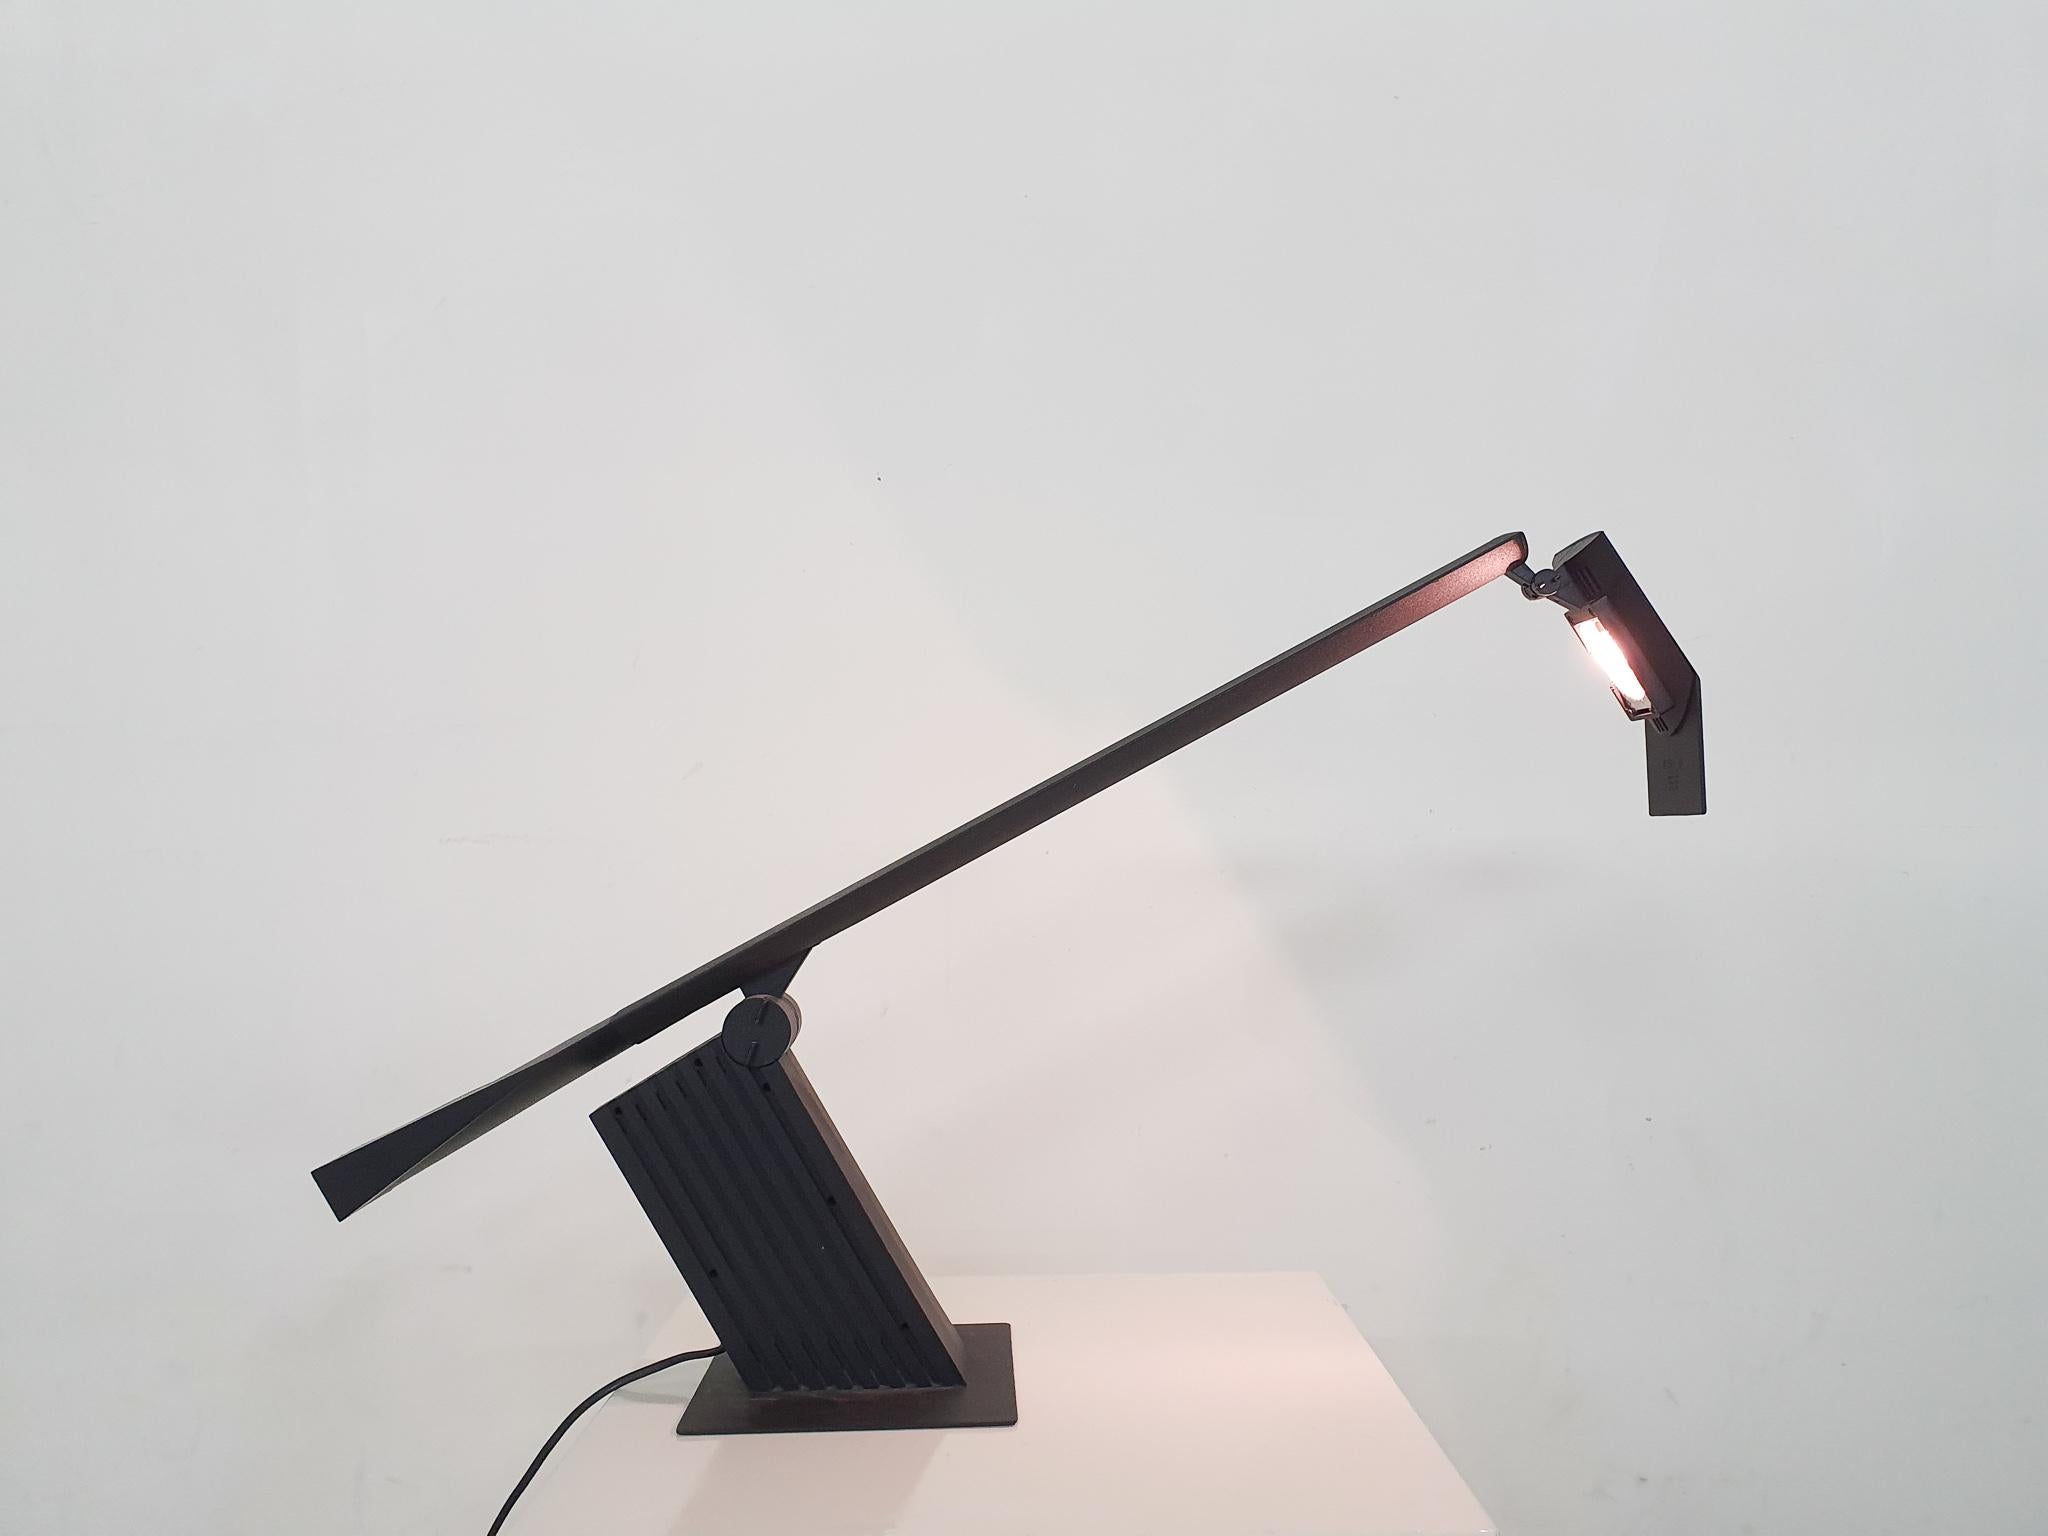 Black plastic and metal adjustable desk light designed by Hans von Klier for Bilumen.
The light uses a halogen lamp. There is a chip from the plastic on the head, next to the halogen lamp.